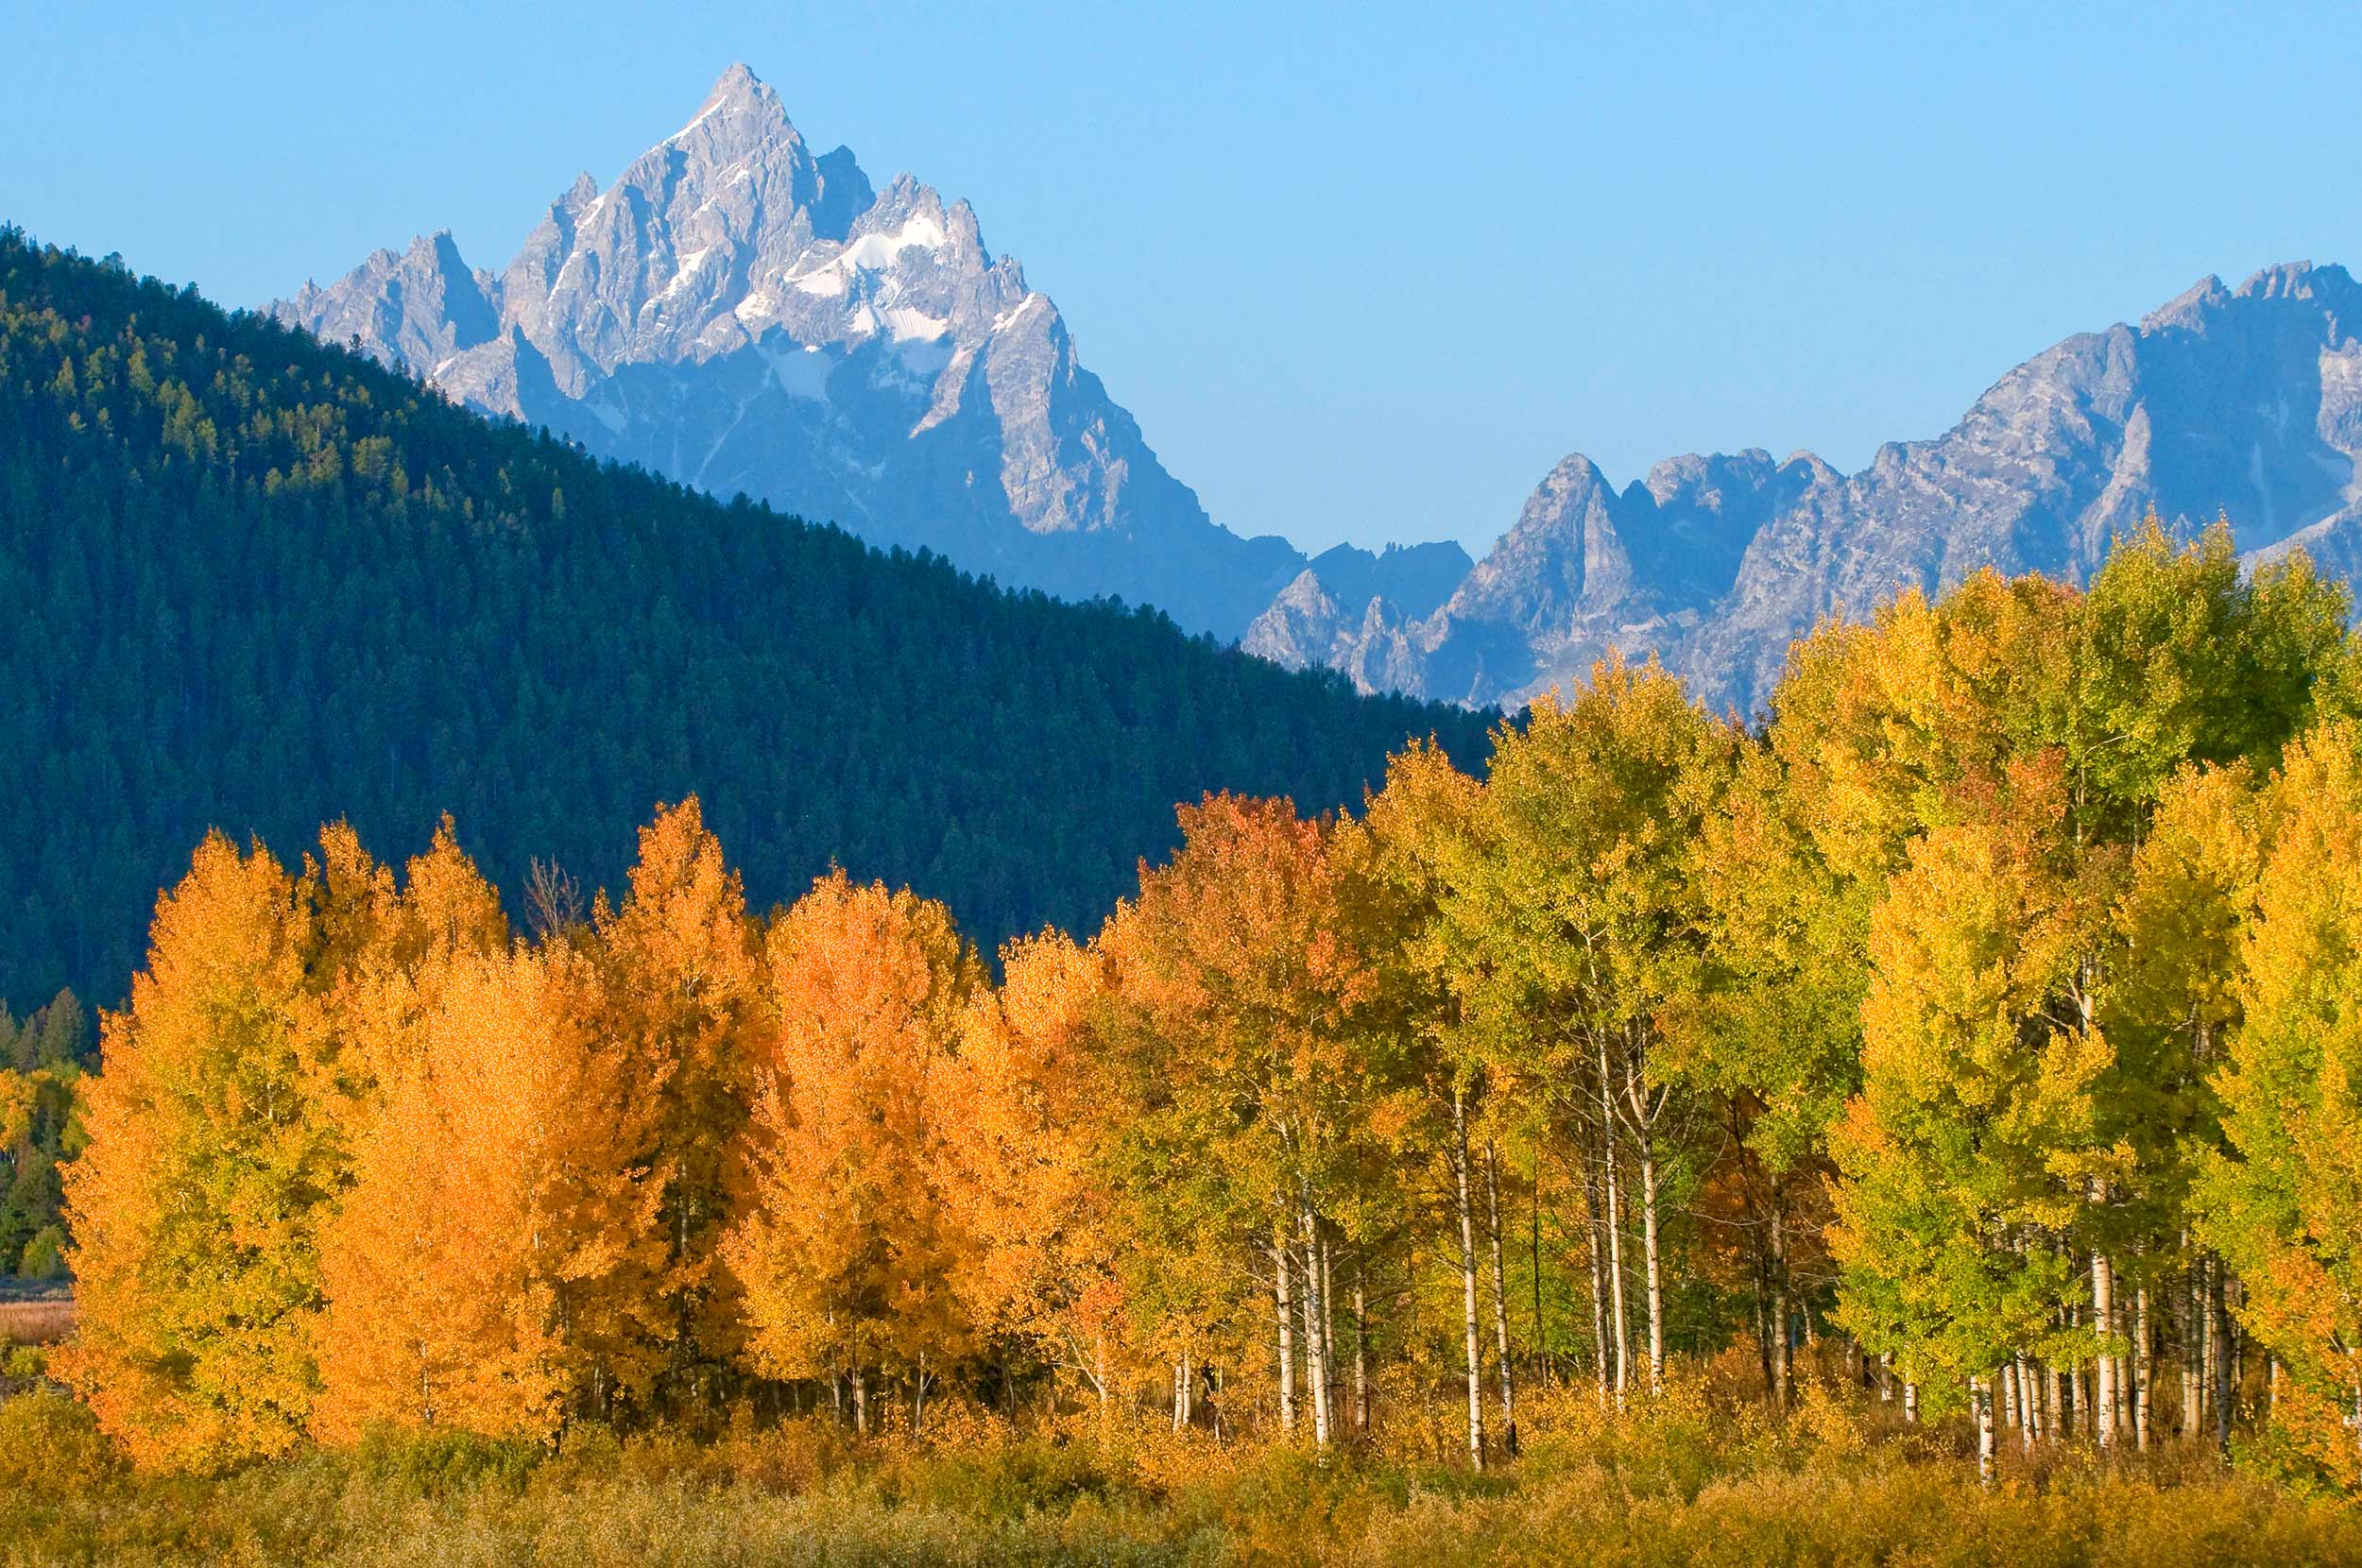 Grand Tetons in the fall with yellow aspen trees